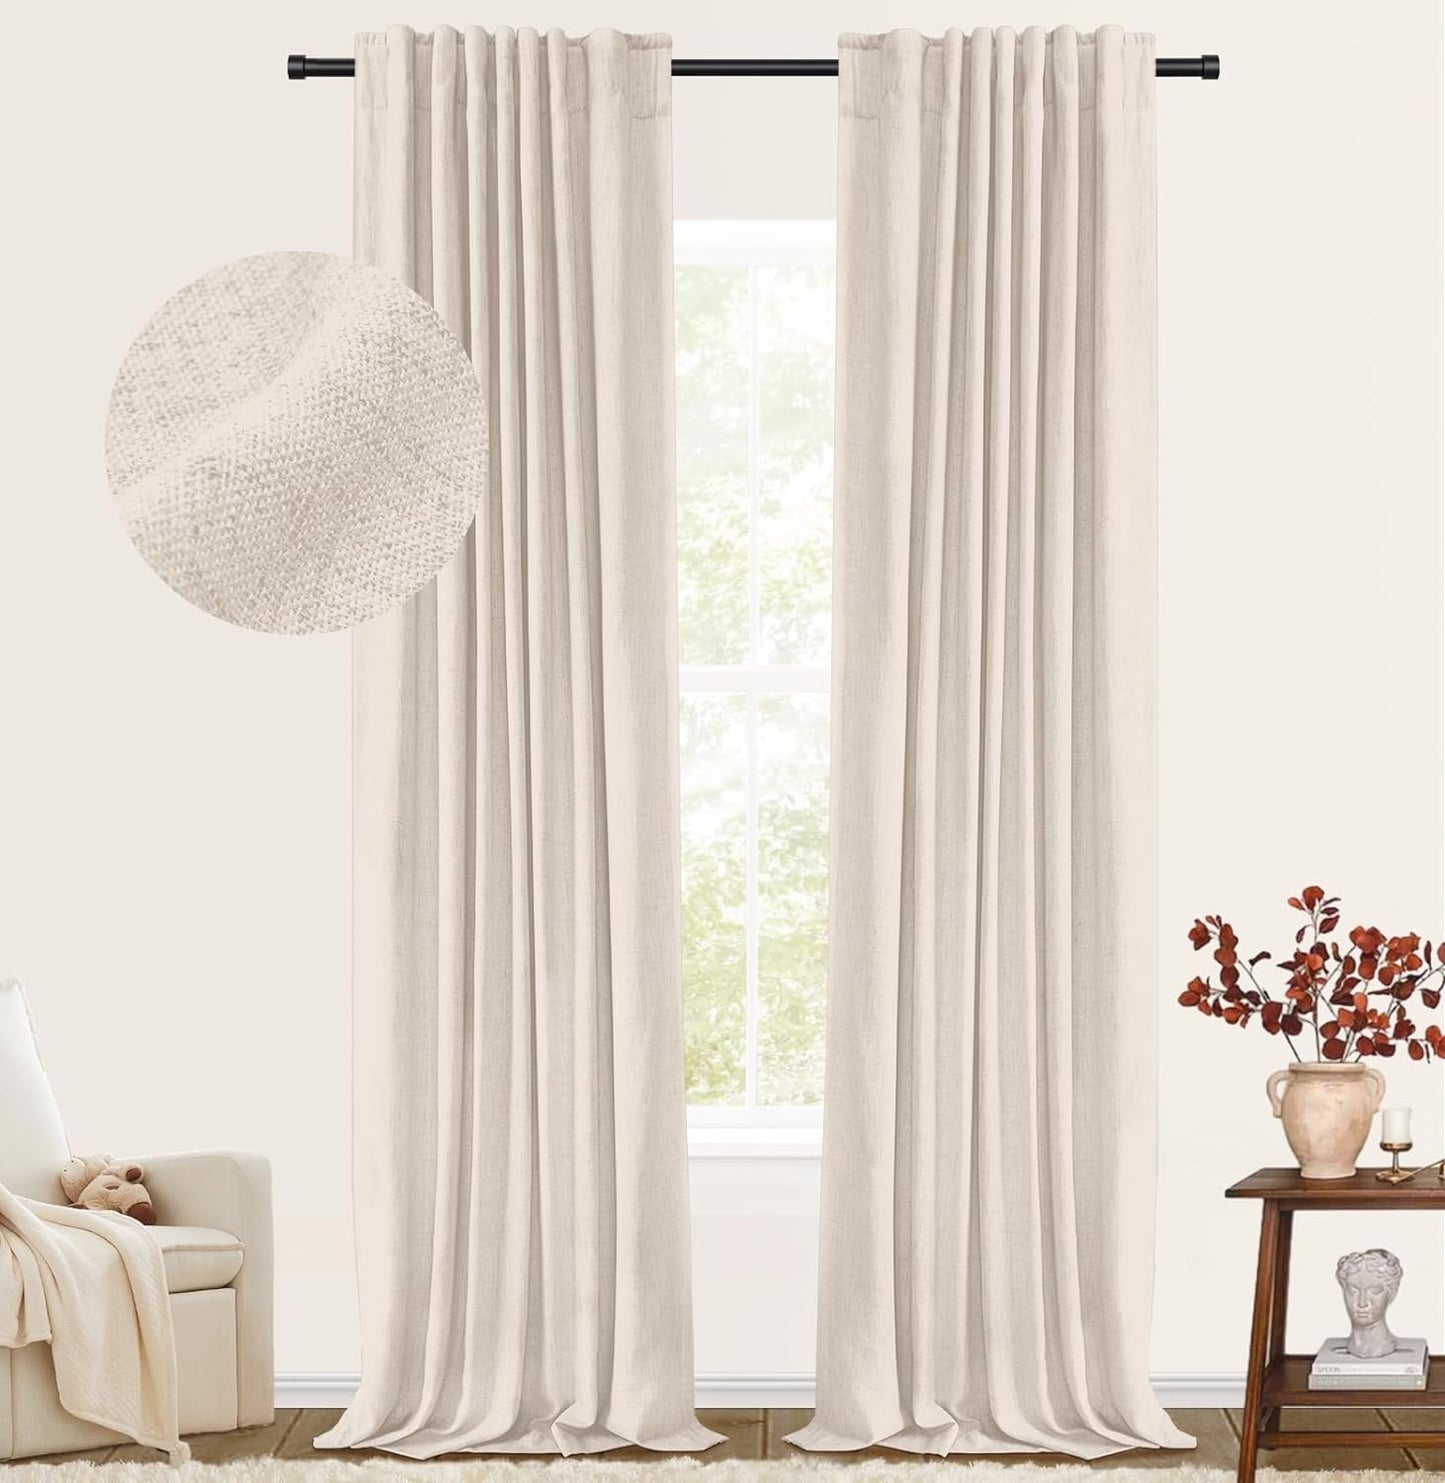 100% Blackout Shield Blackout Curtains for Bedroom Faux Linen Black Out Curtains 84 Inch Length 2 Panels Set, Back Tab/Rod Pocket Thermal Insulated Curtains with Black Liner, 50W X 84L, Dark Grey  100% Blackout Shield 06 Birch 50''W X 90''L 